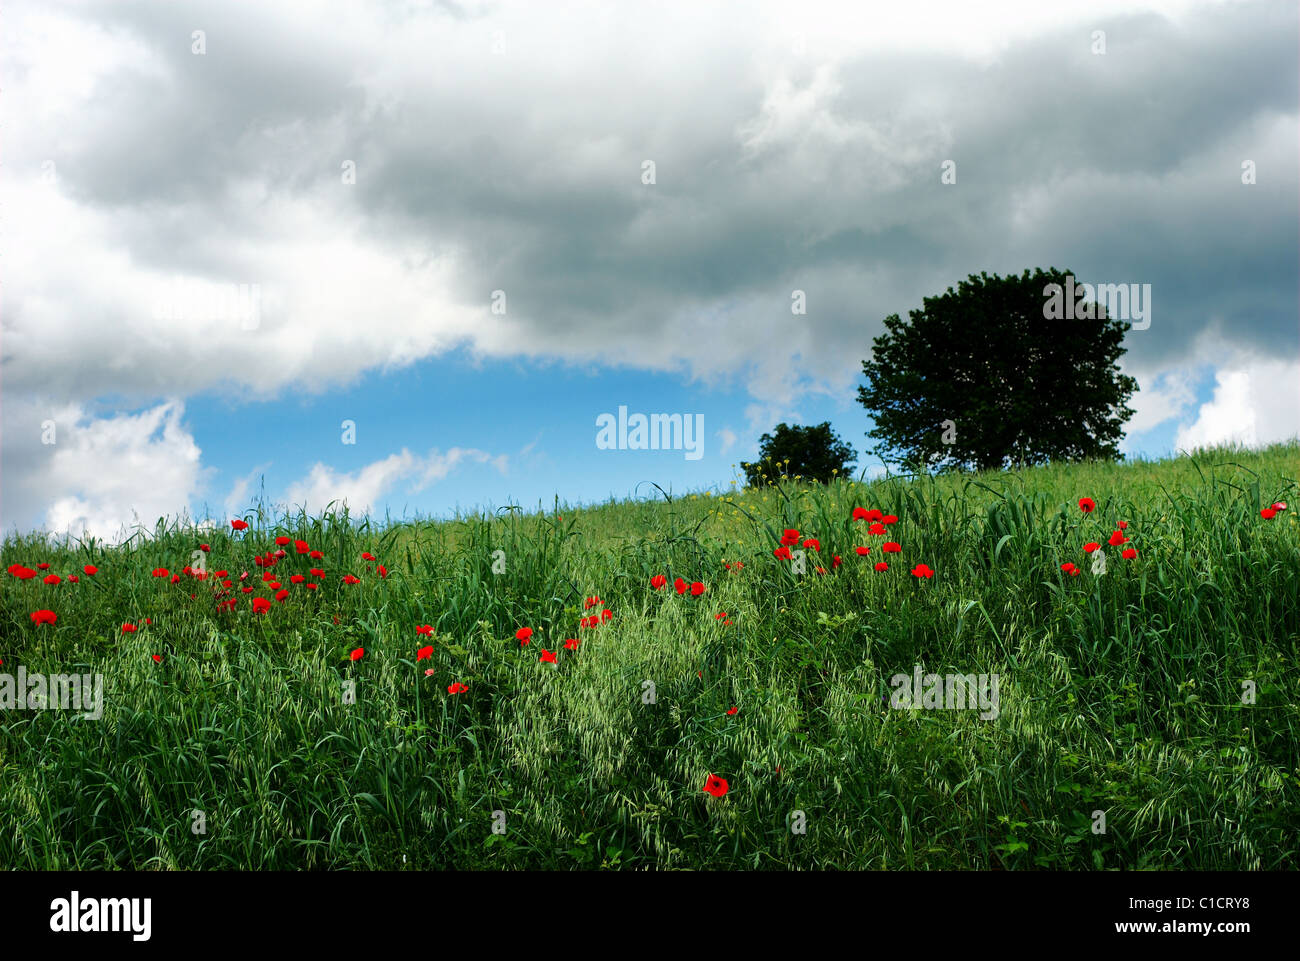 Summer stormy clouds over field with red poppy flowers Stock Photo